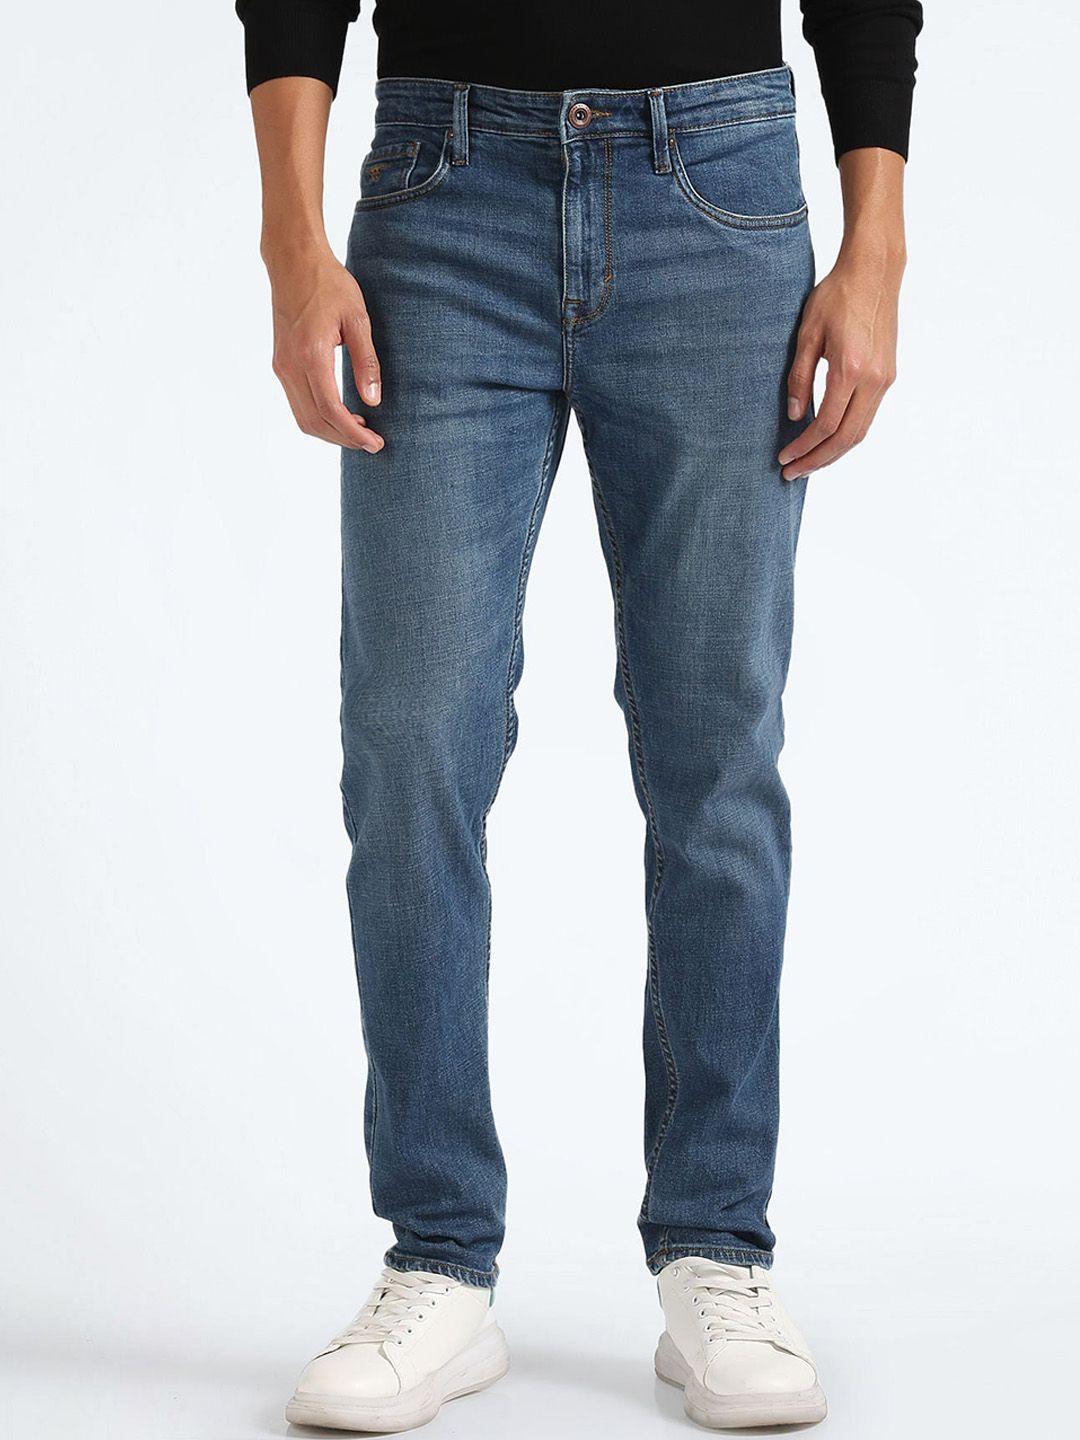 flying-machine-men-tapered-fit-mid-rise-clean-look-light-fade-stretchable-jeans